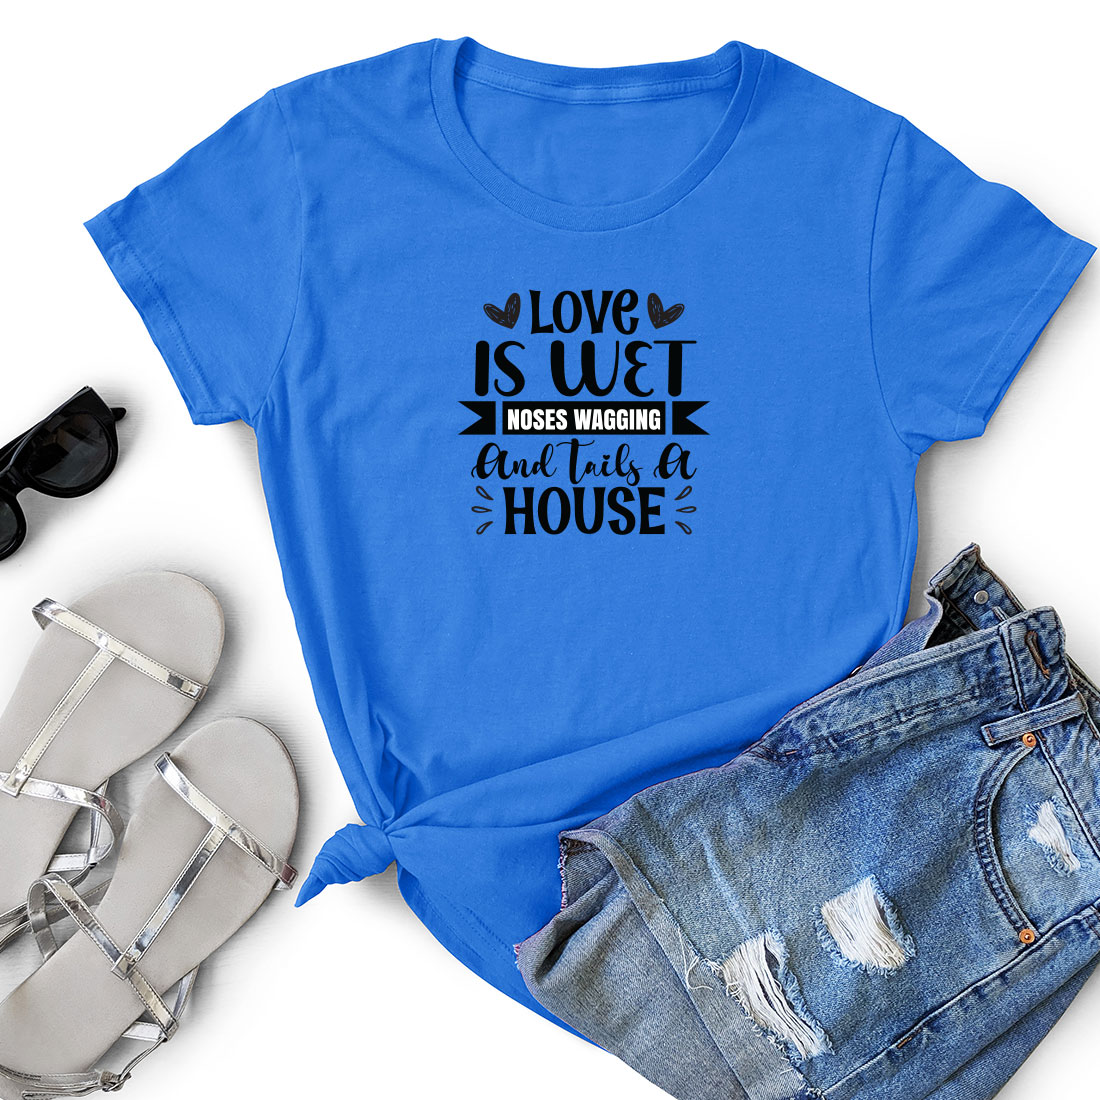 T - shirt that says love is just inside the house.